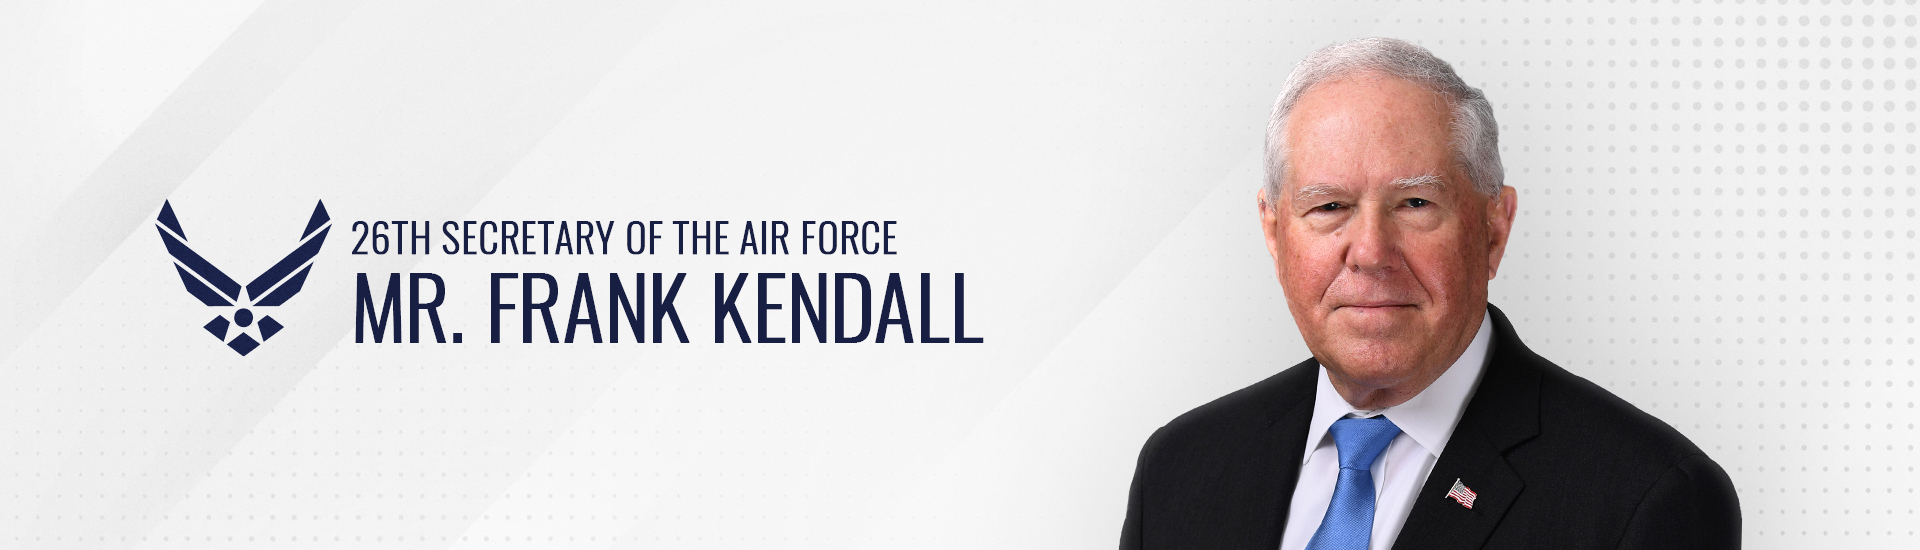 Secretary of the Air Force Mr. Frank Kendall